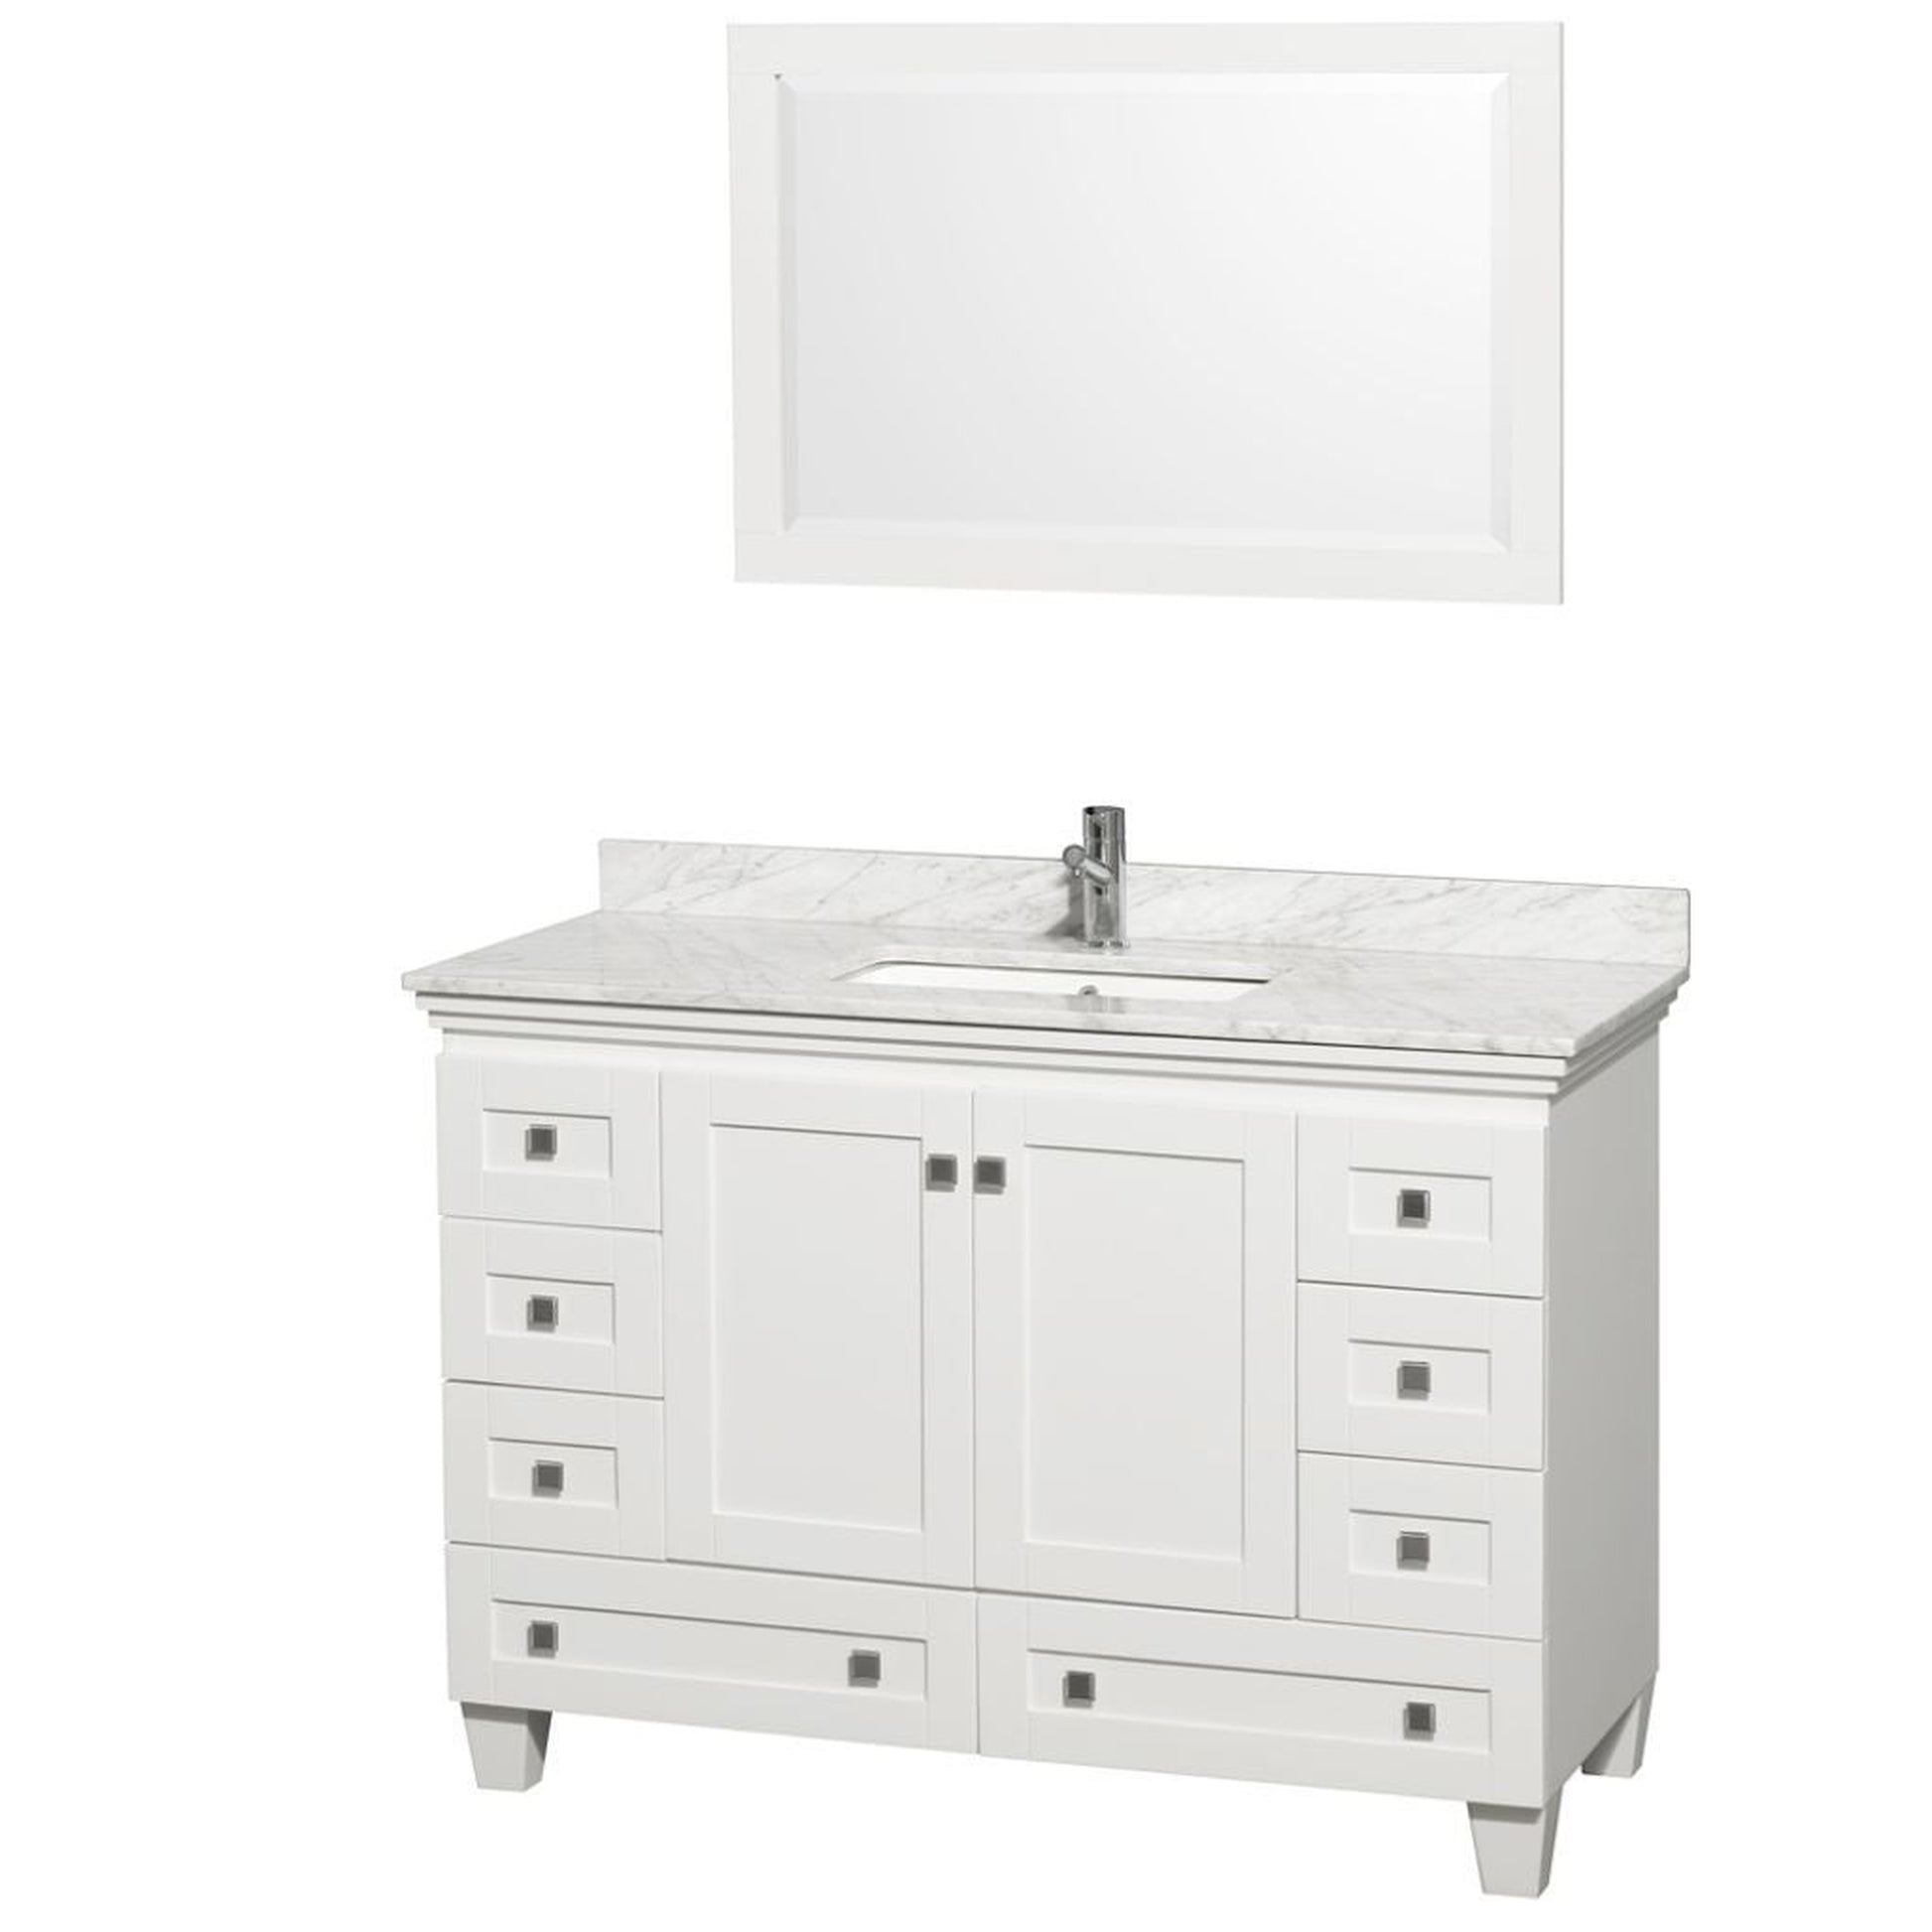 Wyndham Collection Acclaim 48" Single Bathroom White Vanity Set With White Carrara Marble Countertop And Undermount Square Sink And 24" Mirror